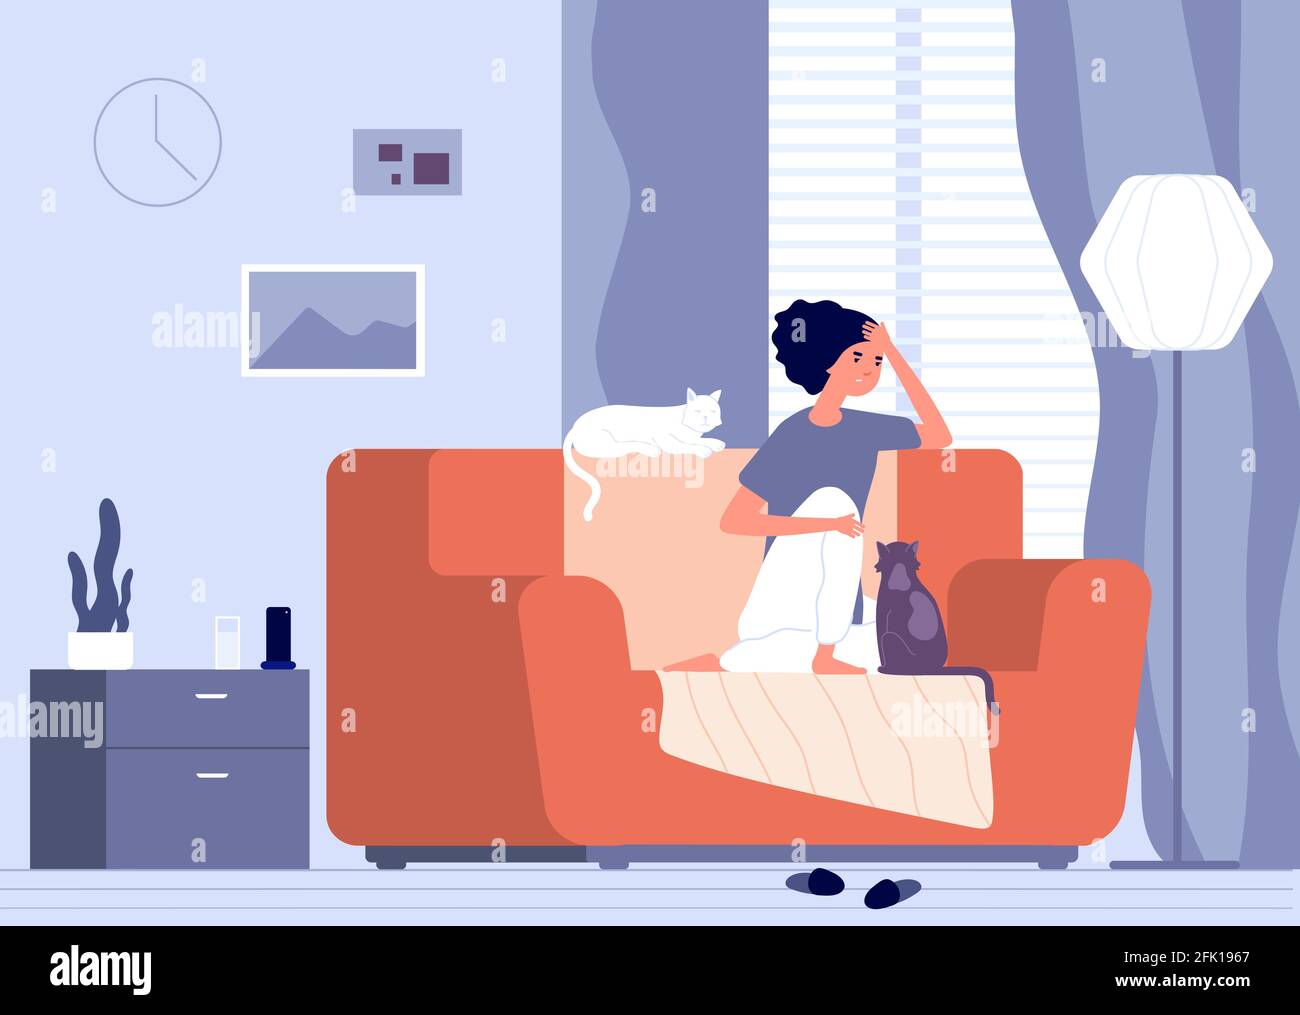 Woman and cat. Cartoon pet, young girl with animal in apartment. Home relax, comfortable rest interior. Lady and kittens vector illustration Stock Vector